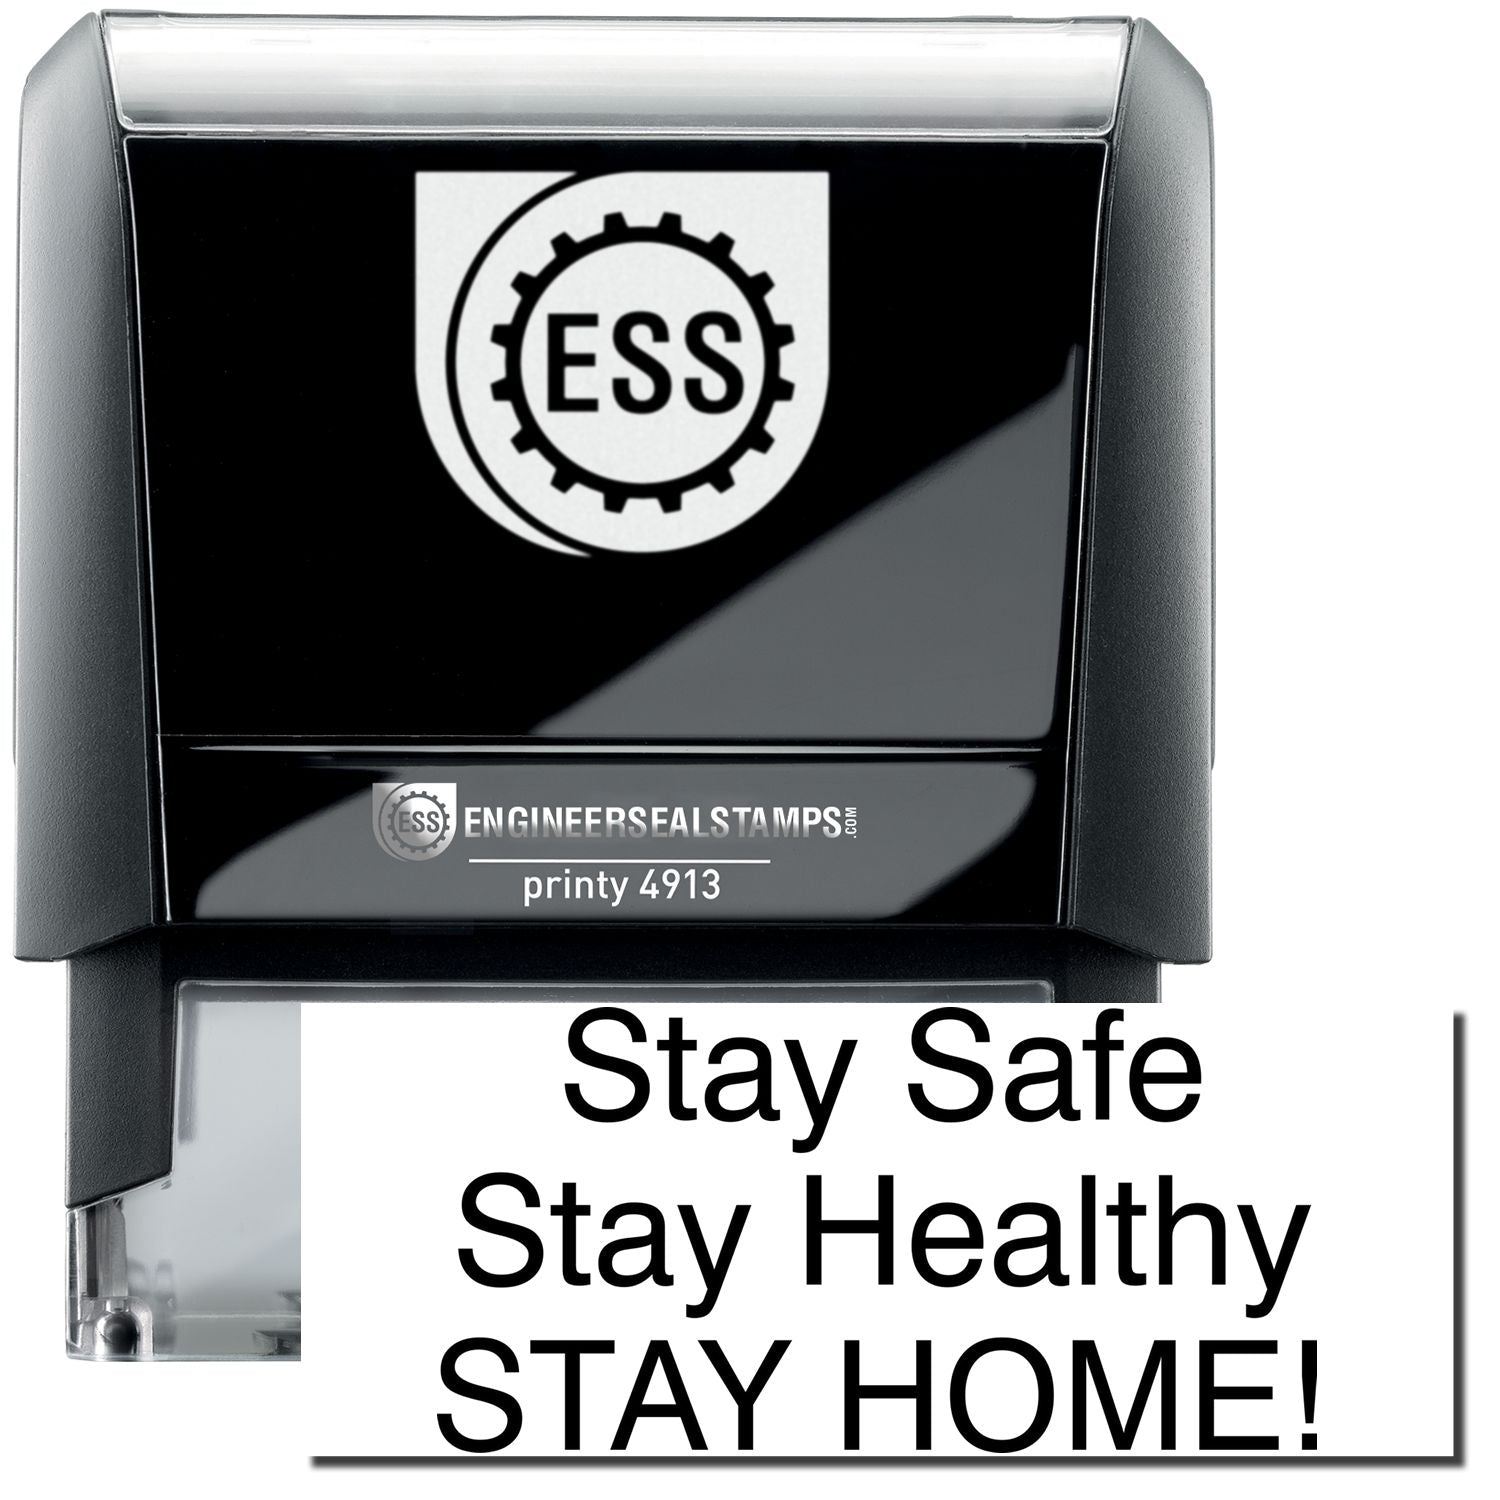 A self-inking stamp with a stamped image showing how the text "Stay Safe Stay Healthy STAY HOME!" in a large font is displayed by it after stamping.